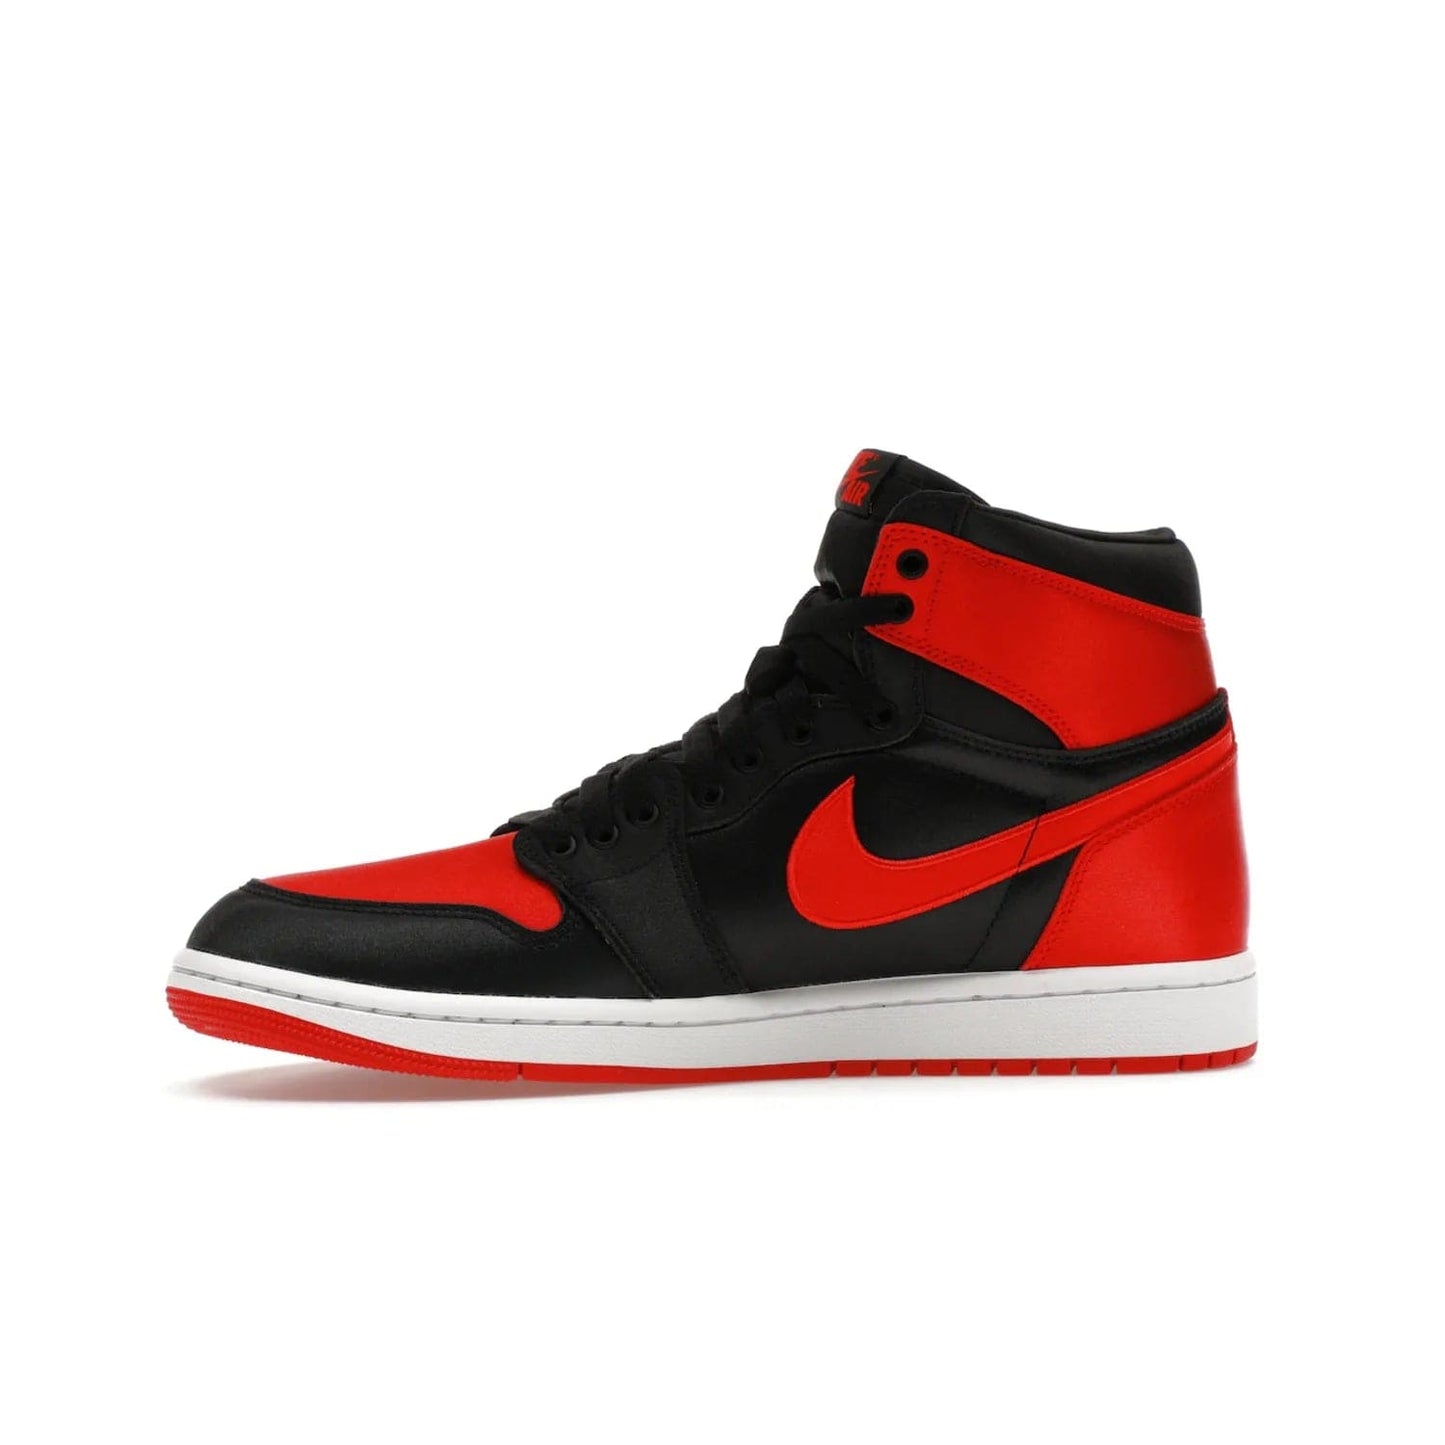 Jordan 1 Retro High OG Satin Bred (Women's) - Image 18 - Only at www.BallersClubKickz.com - Introducing the Jordan 1 Retro High OG Satin Bred (Women's). Luxe satin finish, contrasting hues & classic accents. Trending sneakers symbolizing timelessness & heritage. Make a bold statement with this iconic shoe. Available October 4, 2023.